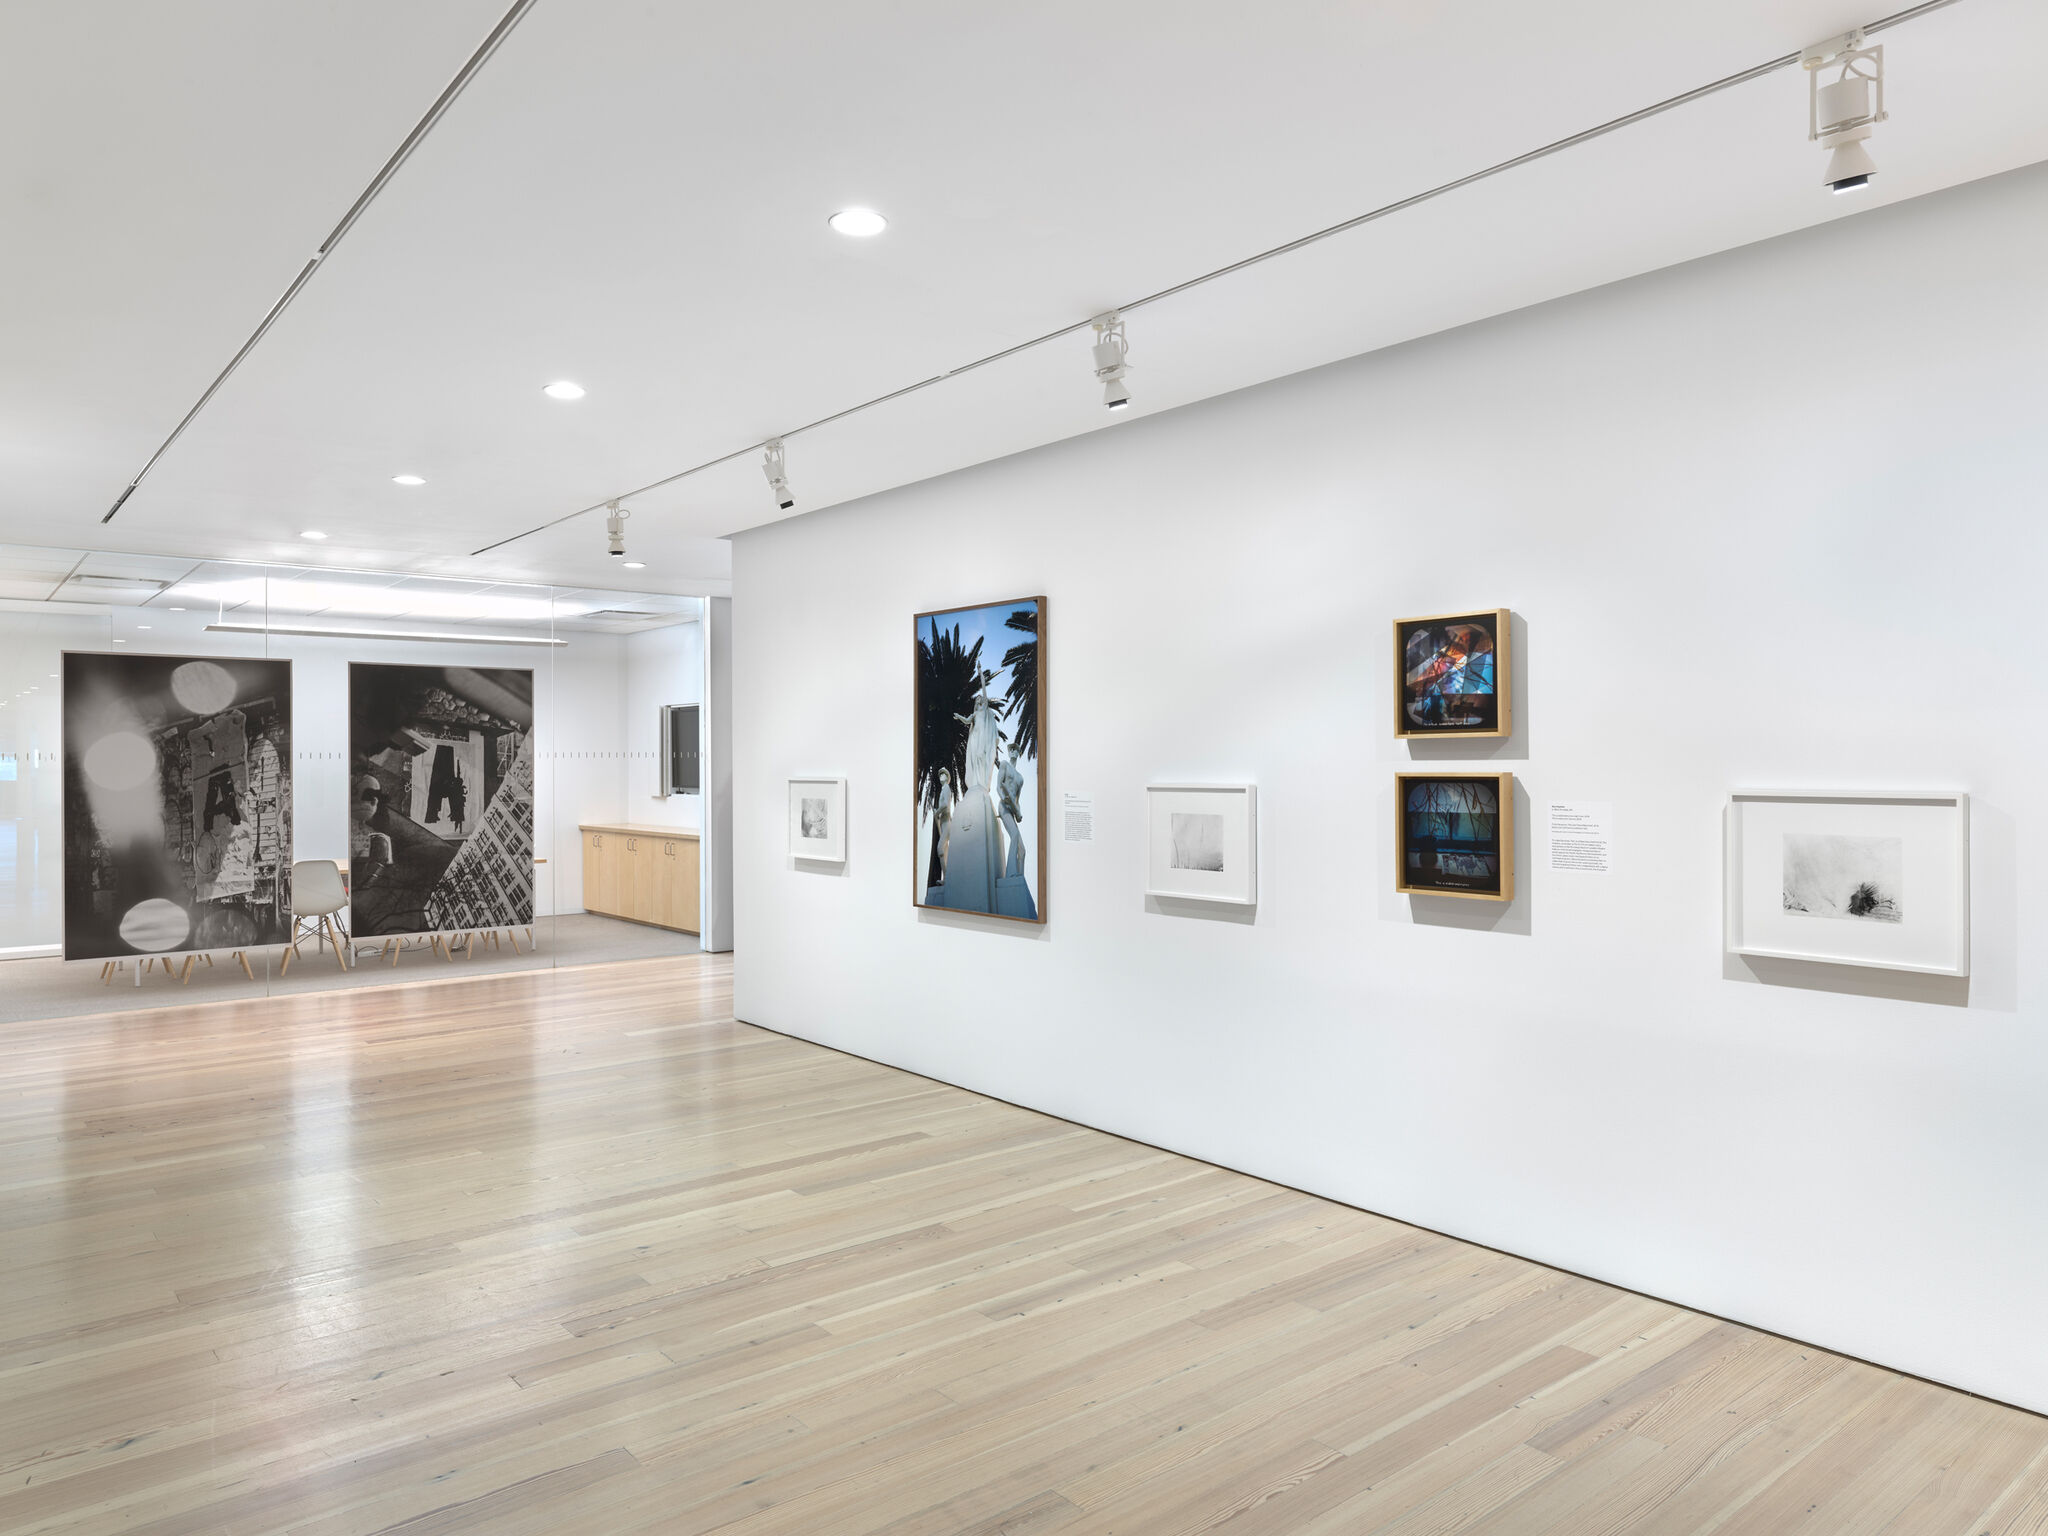 Artworks in a light-filled gallery.